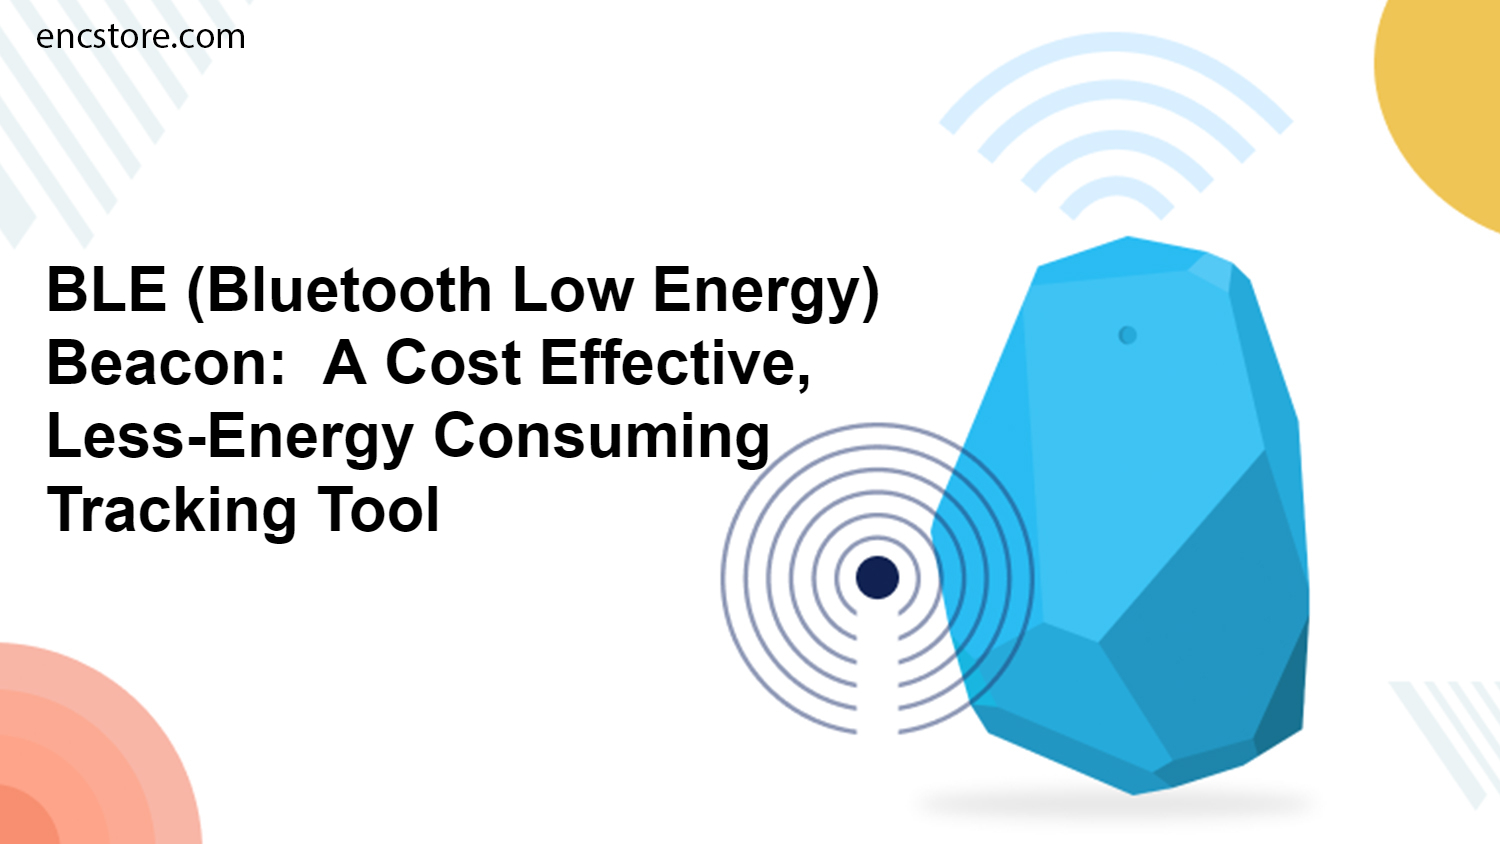 BLE Beacon: A Cost Effective Less Energy Consuming Tracking Tool